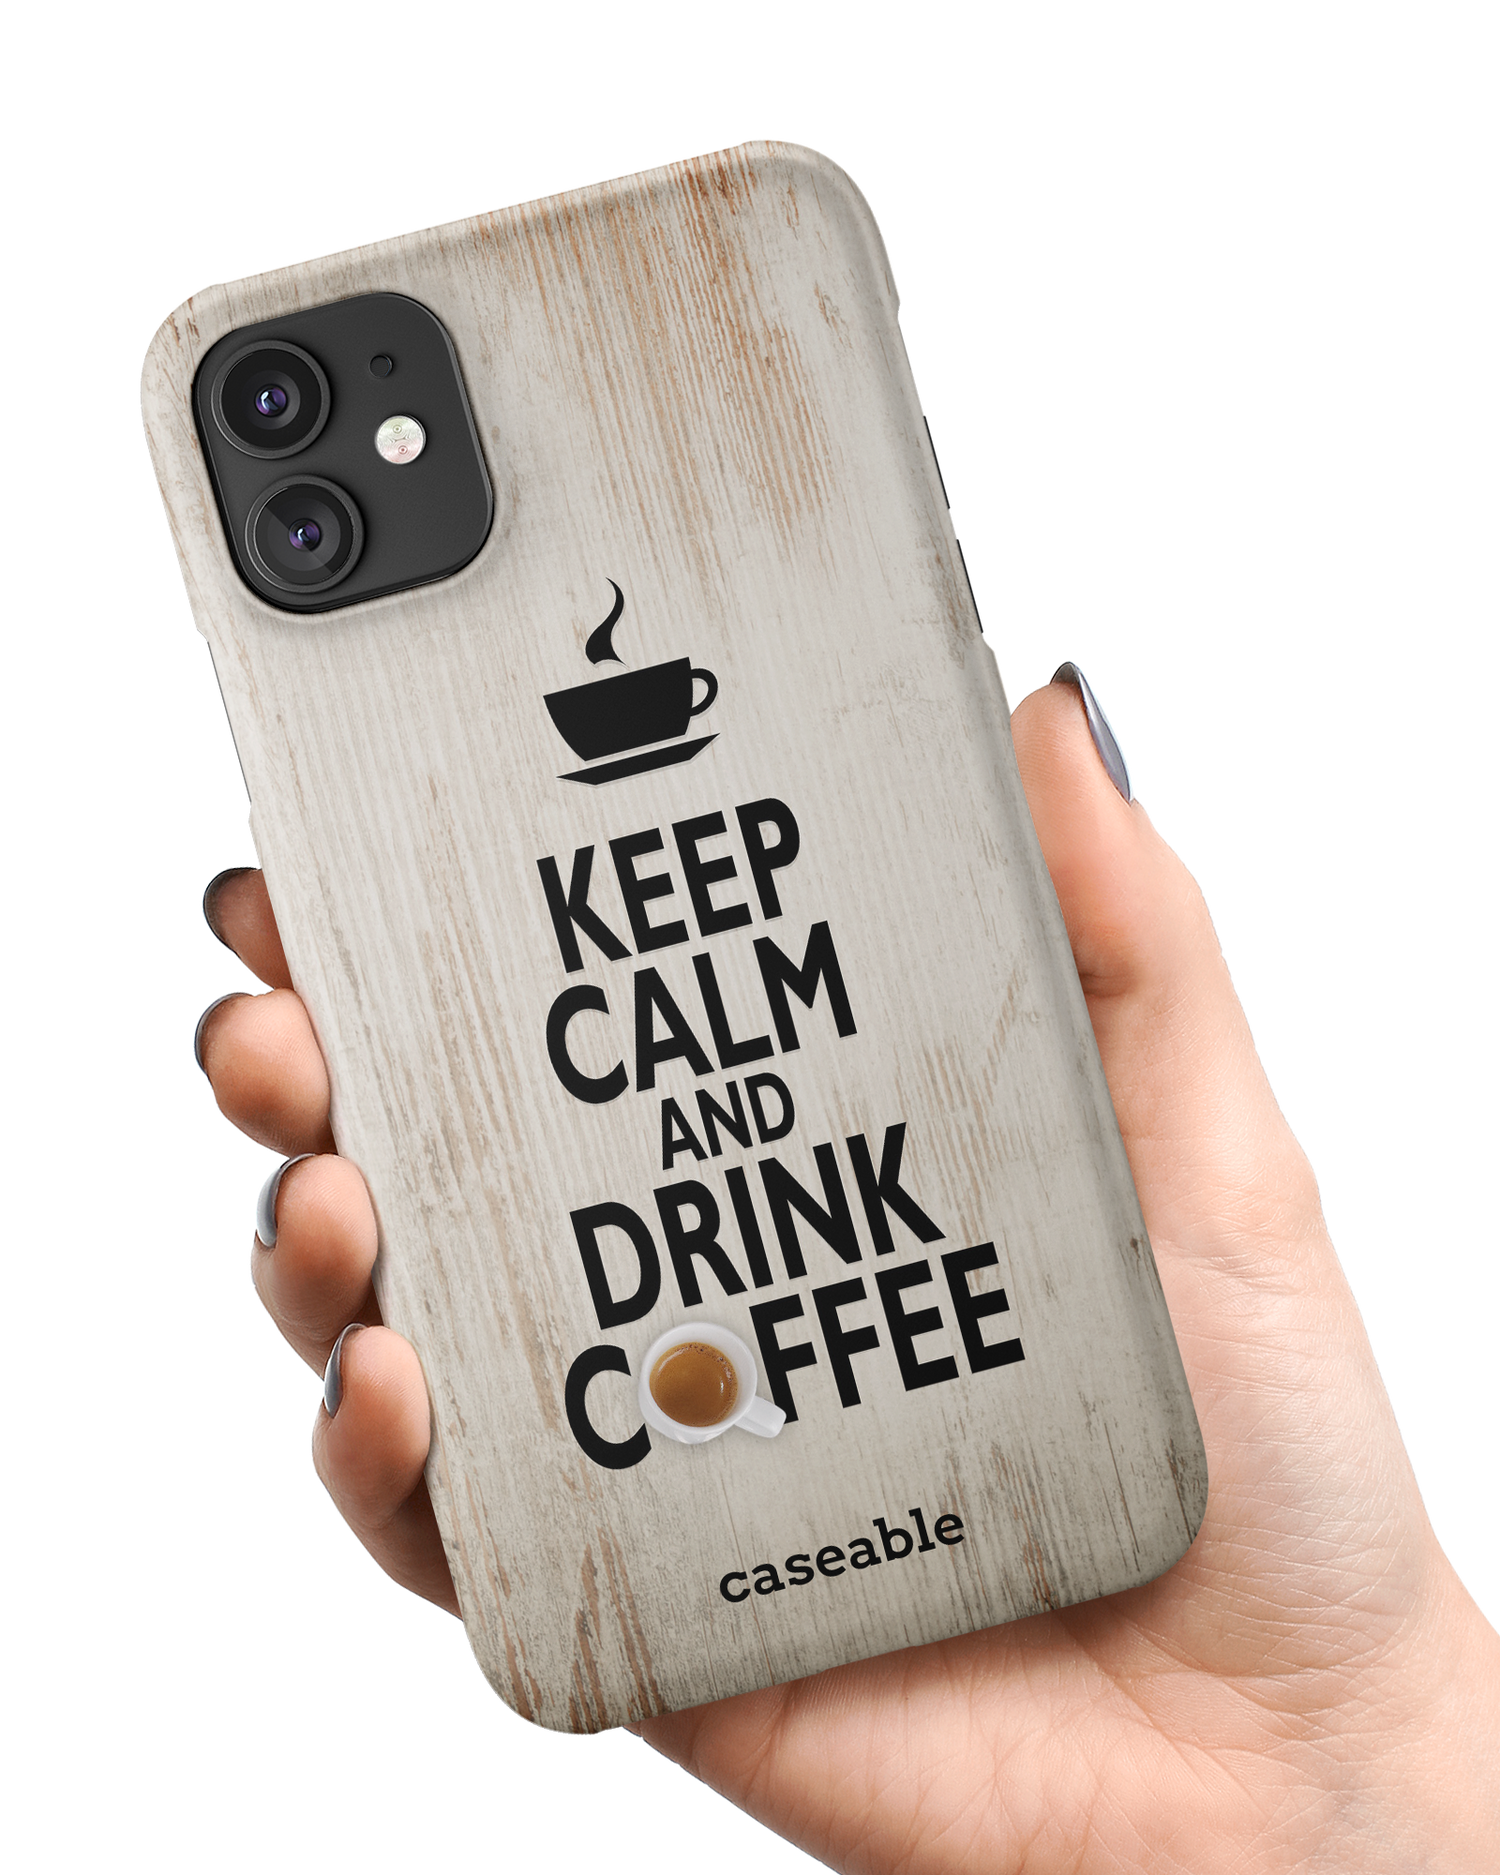 Drink Coffee Hard Shell Phone Case Apple iPhone 11 held in hand